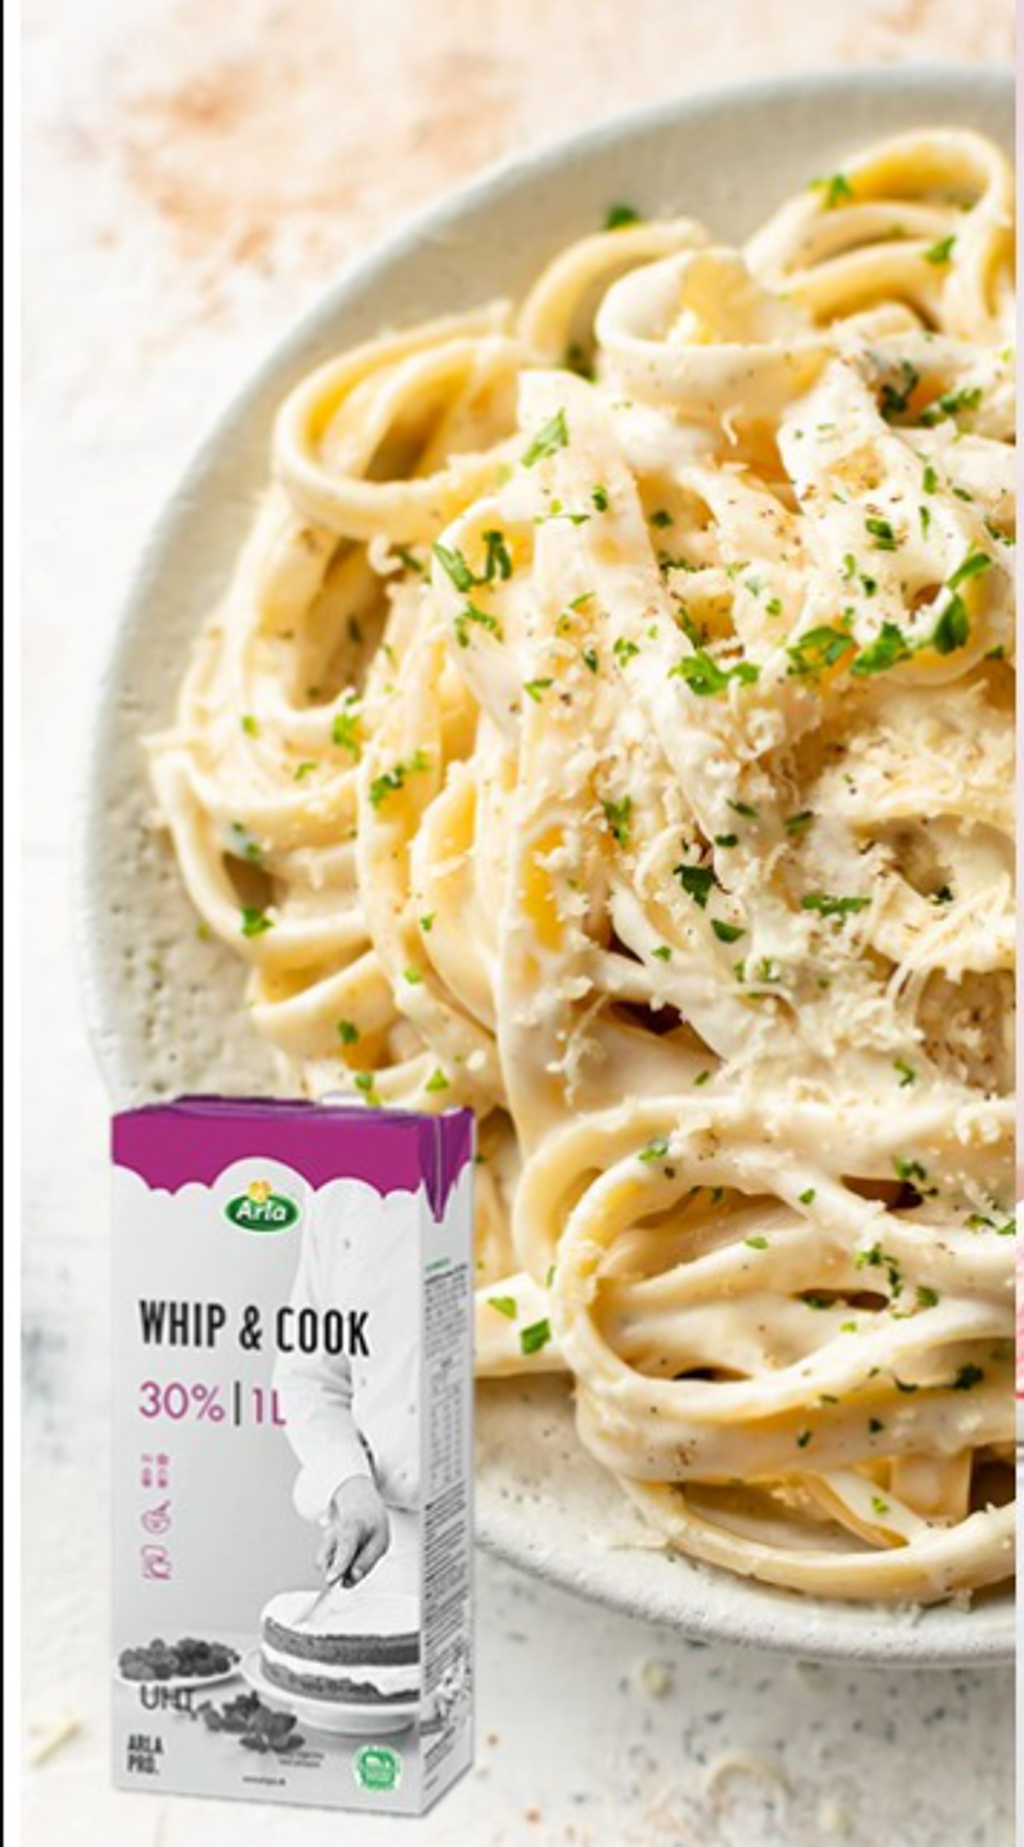 Arla Whip & Cooking 30% 3.PNG